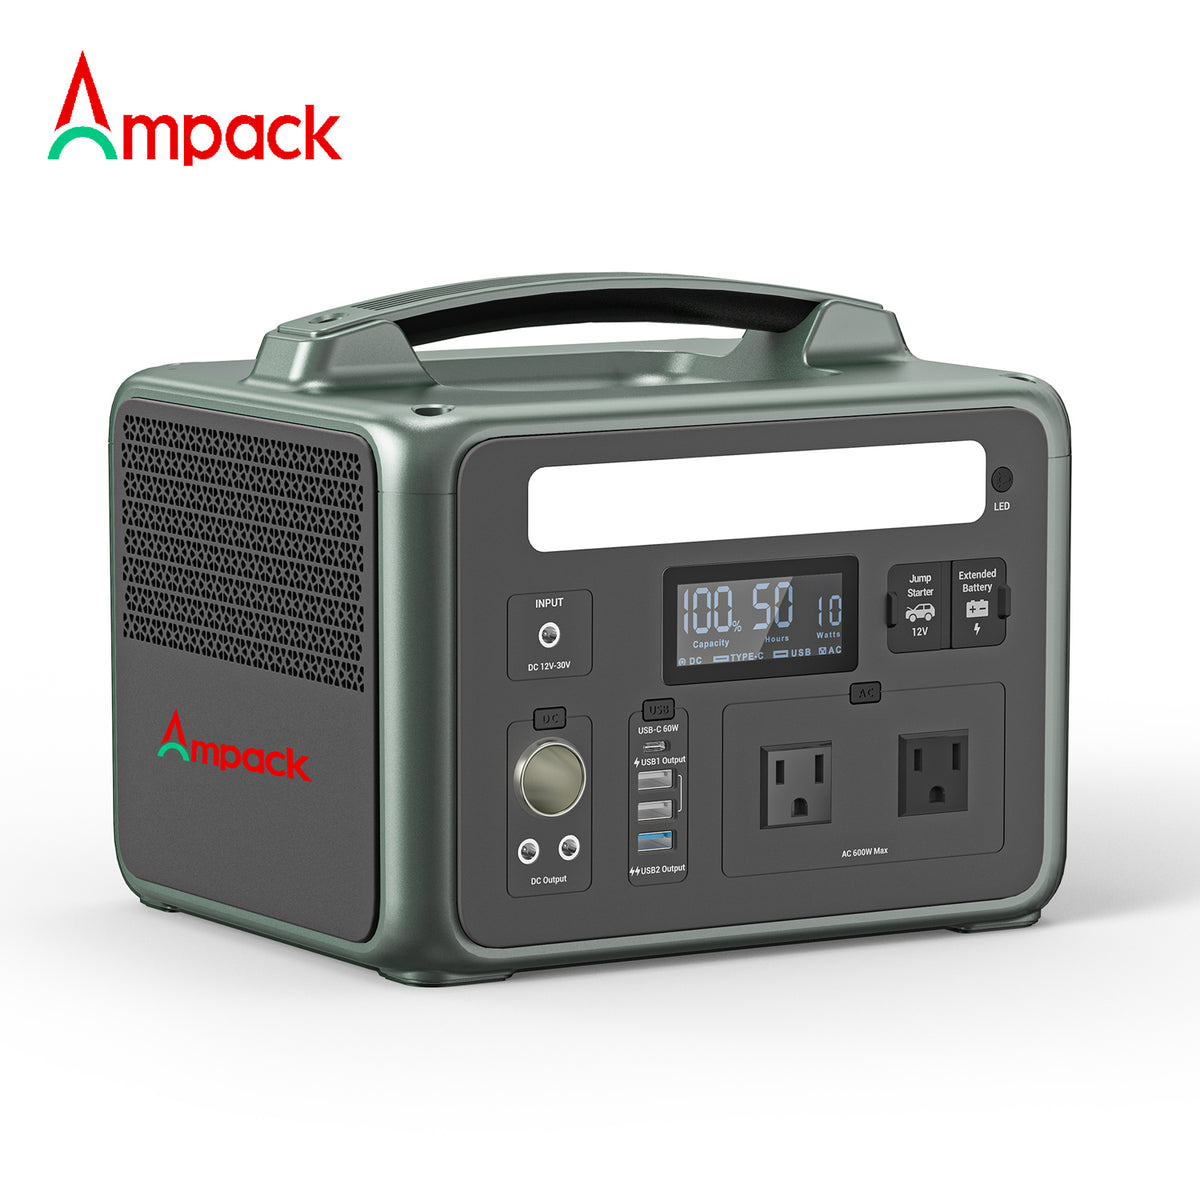 Ampack Portable Power Station 584Wh, 600W (Peak 1800W) 2*AC Outlets, Ampace Jumper Cable Car Starter (Not Included), Lithium Battery Solar Generator for Home Backup, Outdoor Camping, RVs, Emergency, CPAP